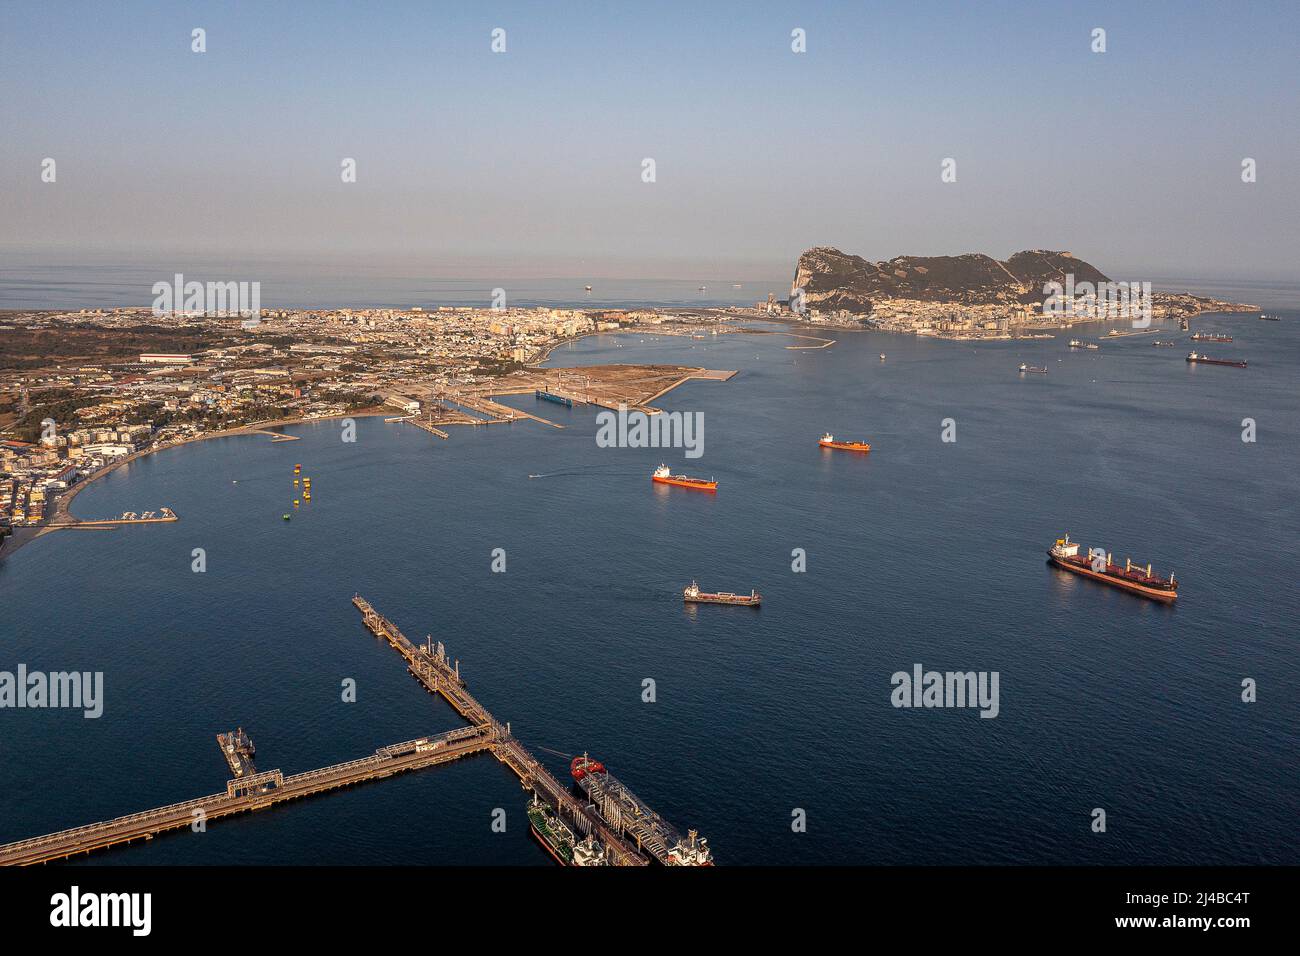 Panoramic view of the Rock of Gibraltar, La Linea de la Concepcion and the Campo de Gibraltar from Spain, Andalusia, Spain Stock Photo